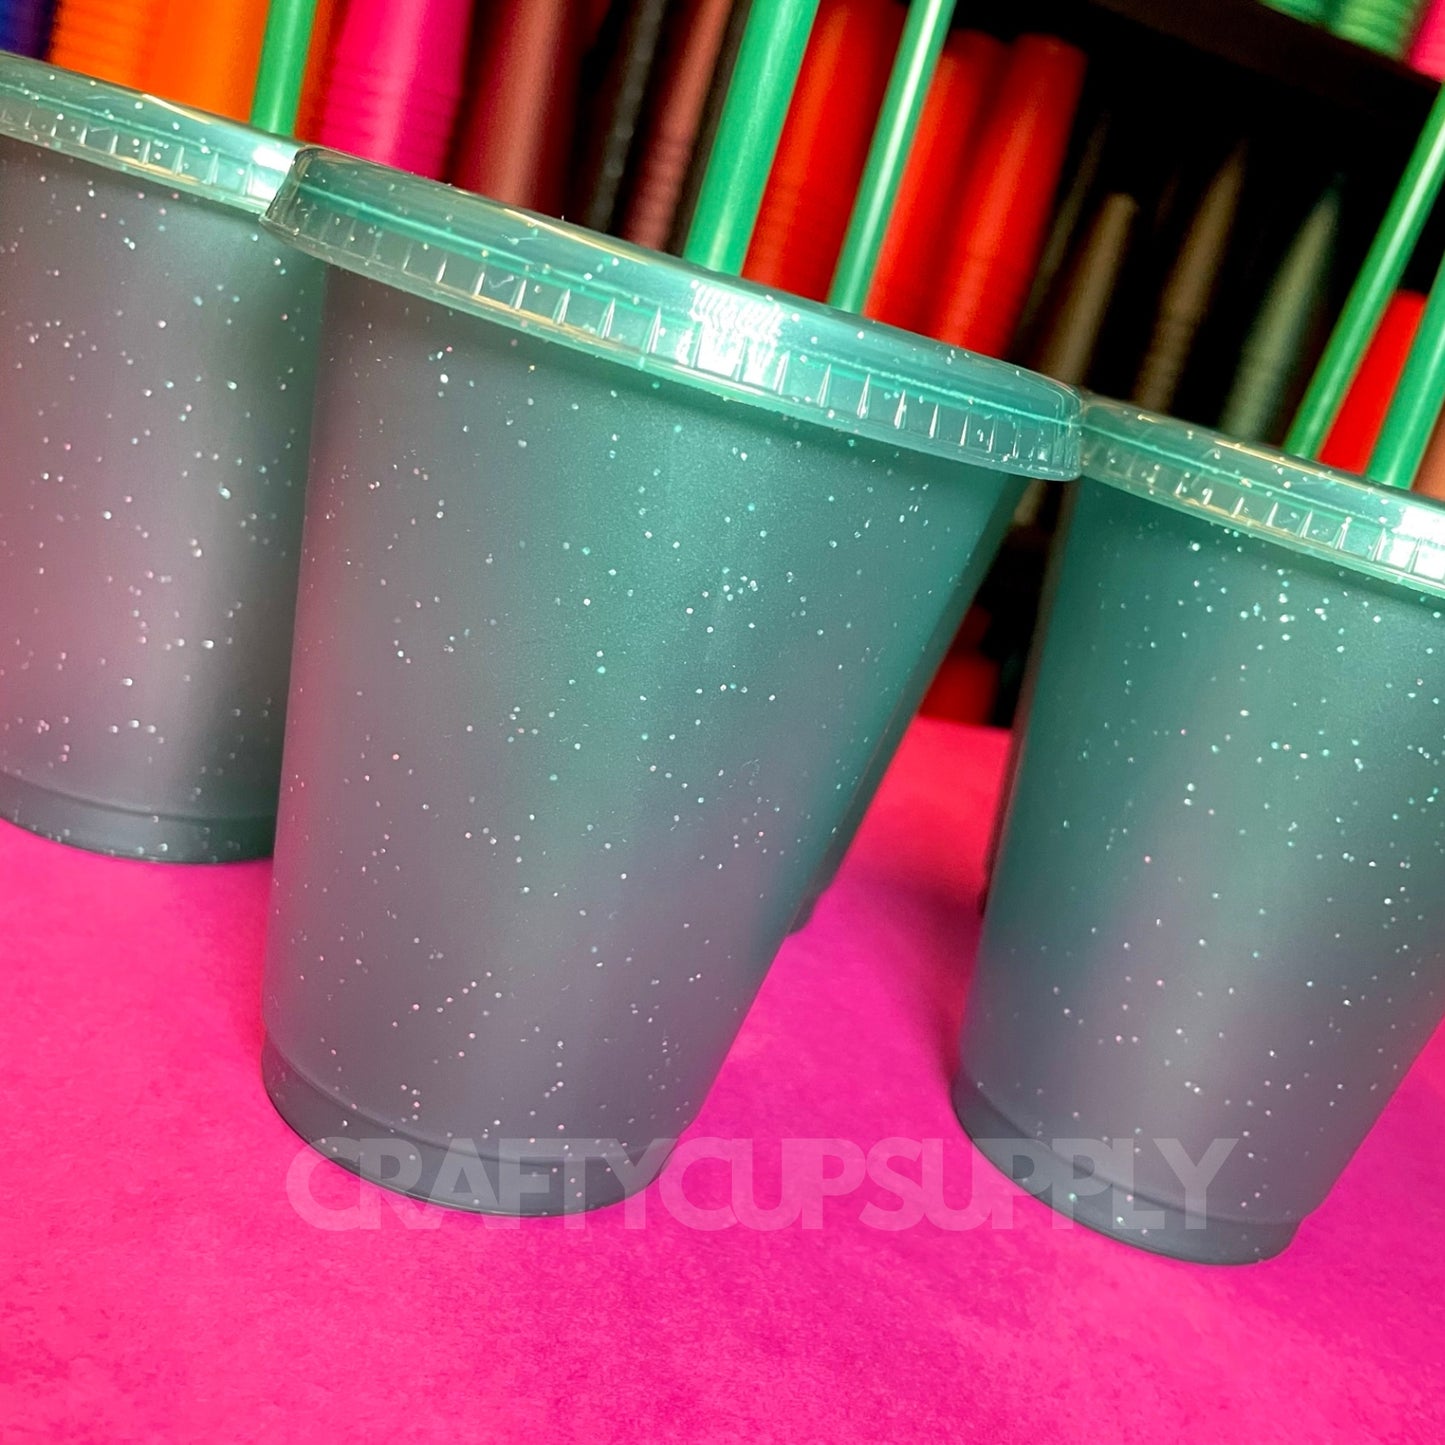 cups for crafting